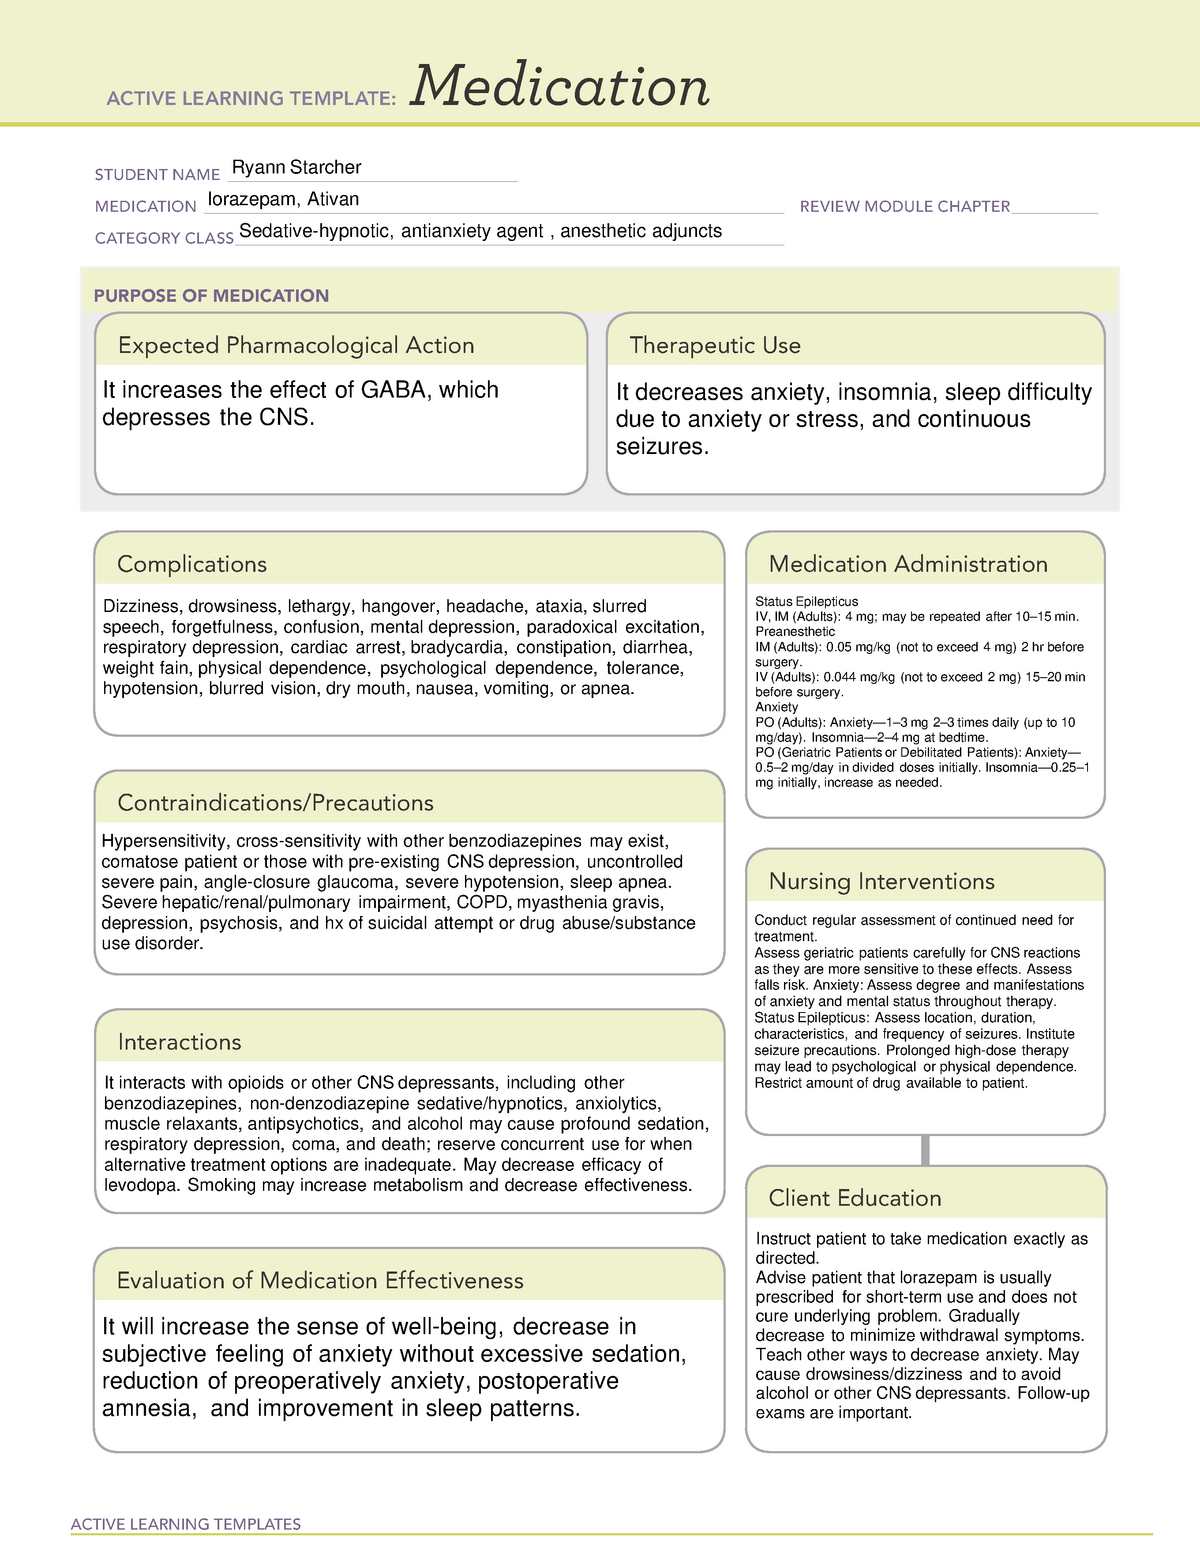 Lorazepam Medication Template for NCLEX based medication ACTIVE